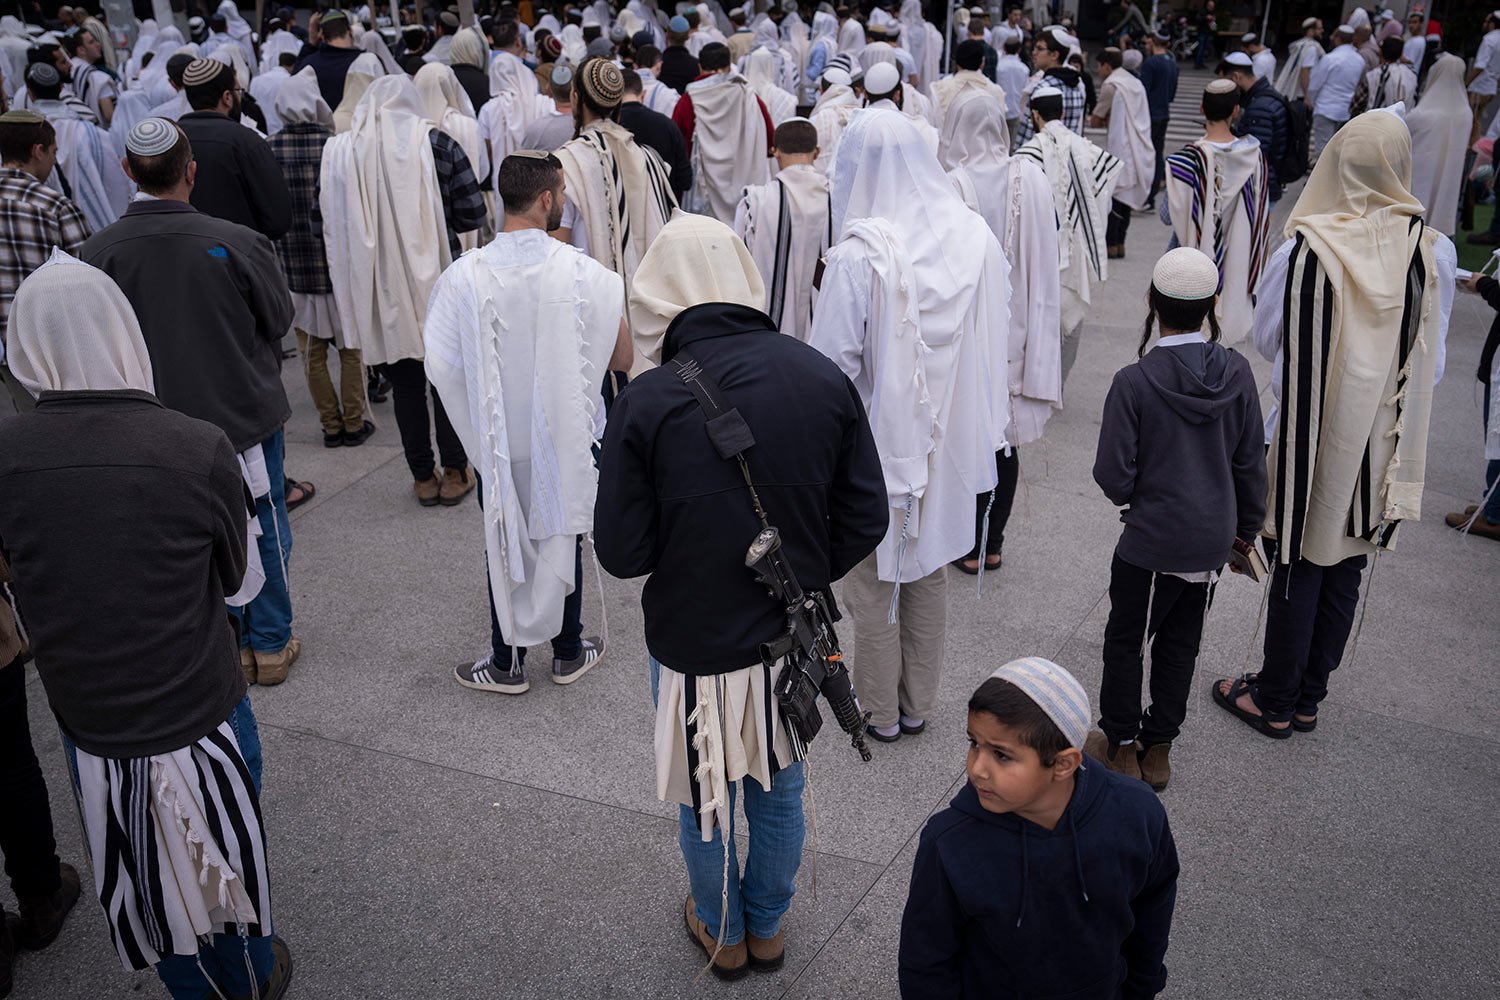  Covered in prayer shawls, Jewish men attend an outdoor prayer and celebrations of the Jewish holiday of Passover, in central Tel Aviv, Israel, Tuesday, April 11, 2023. (AP Photo/Oded Balilty) 